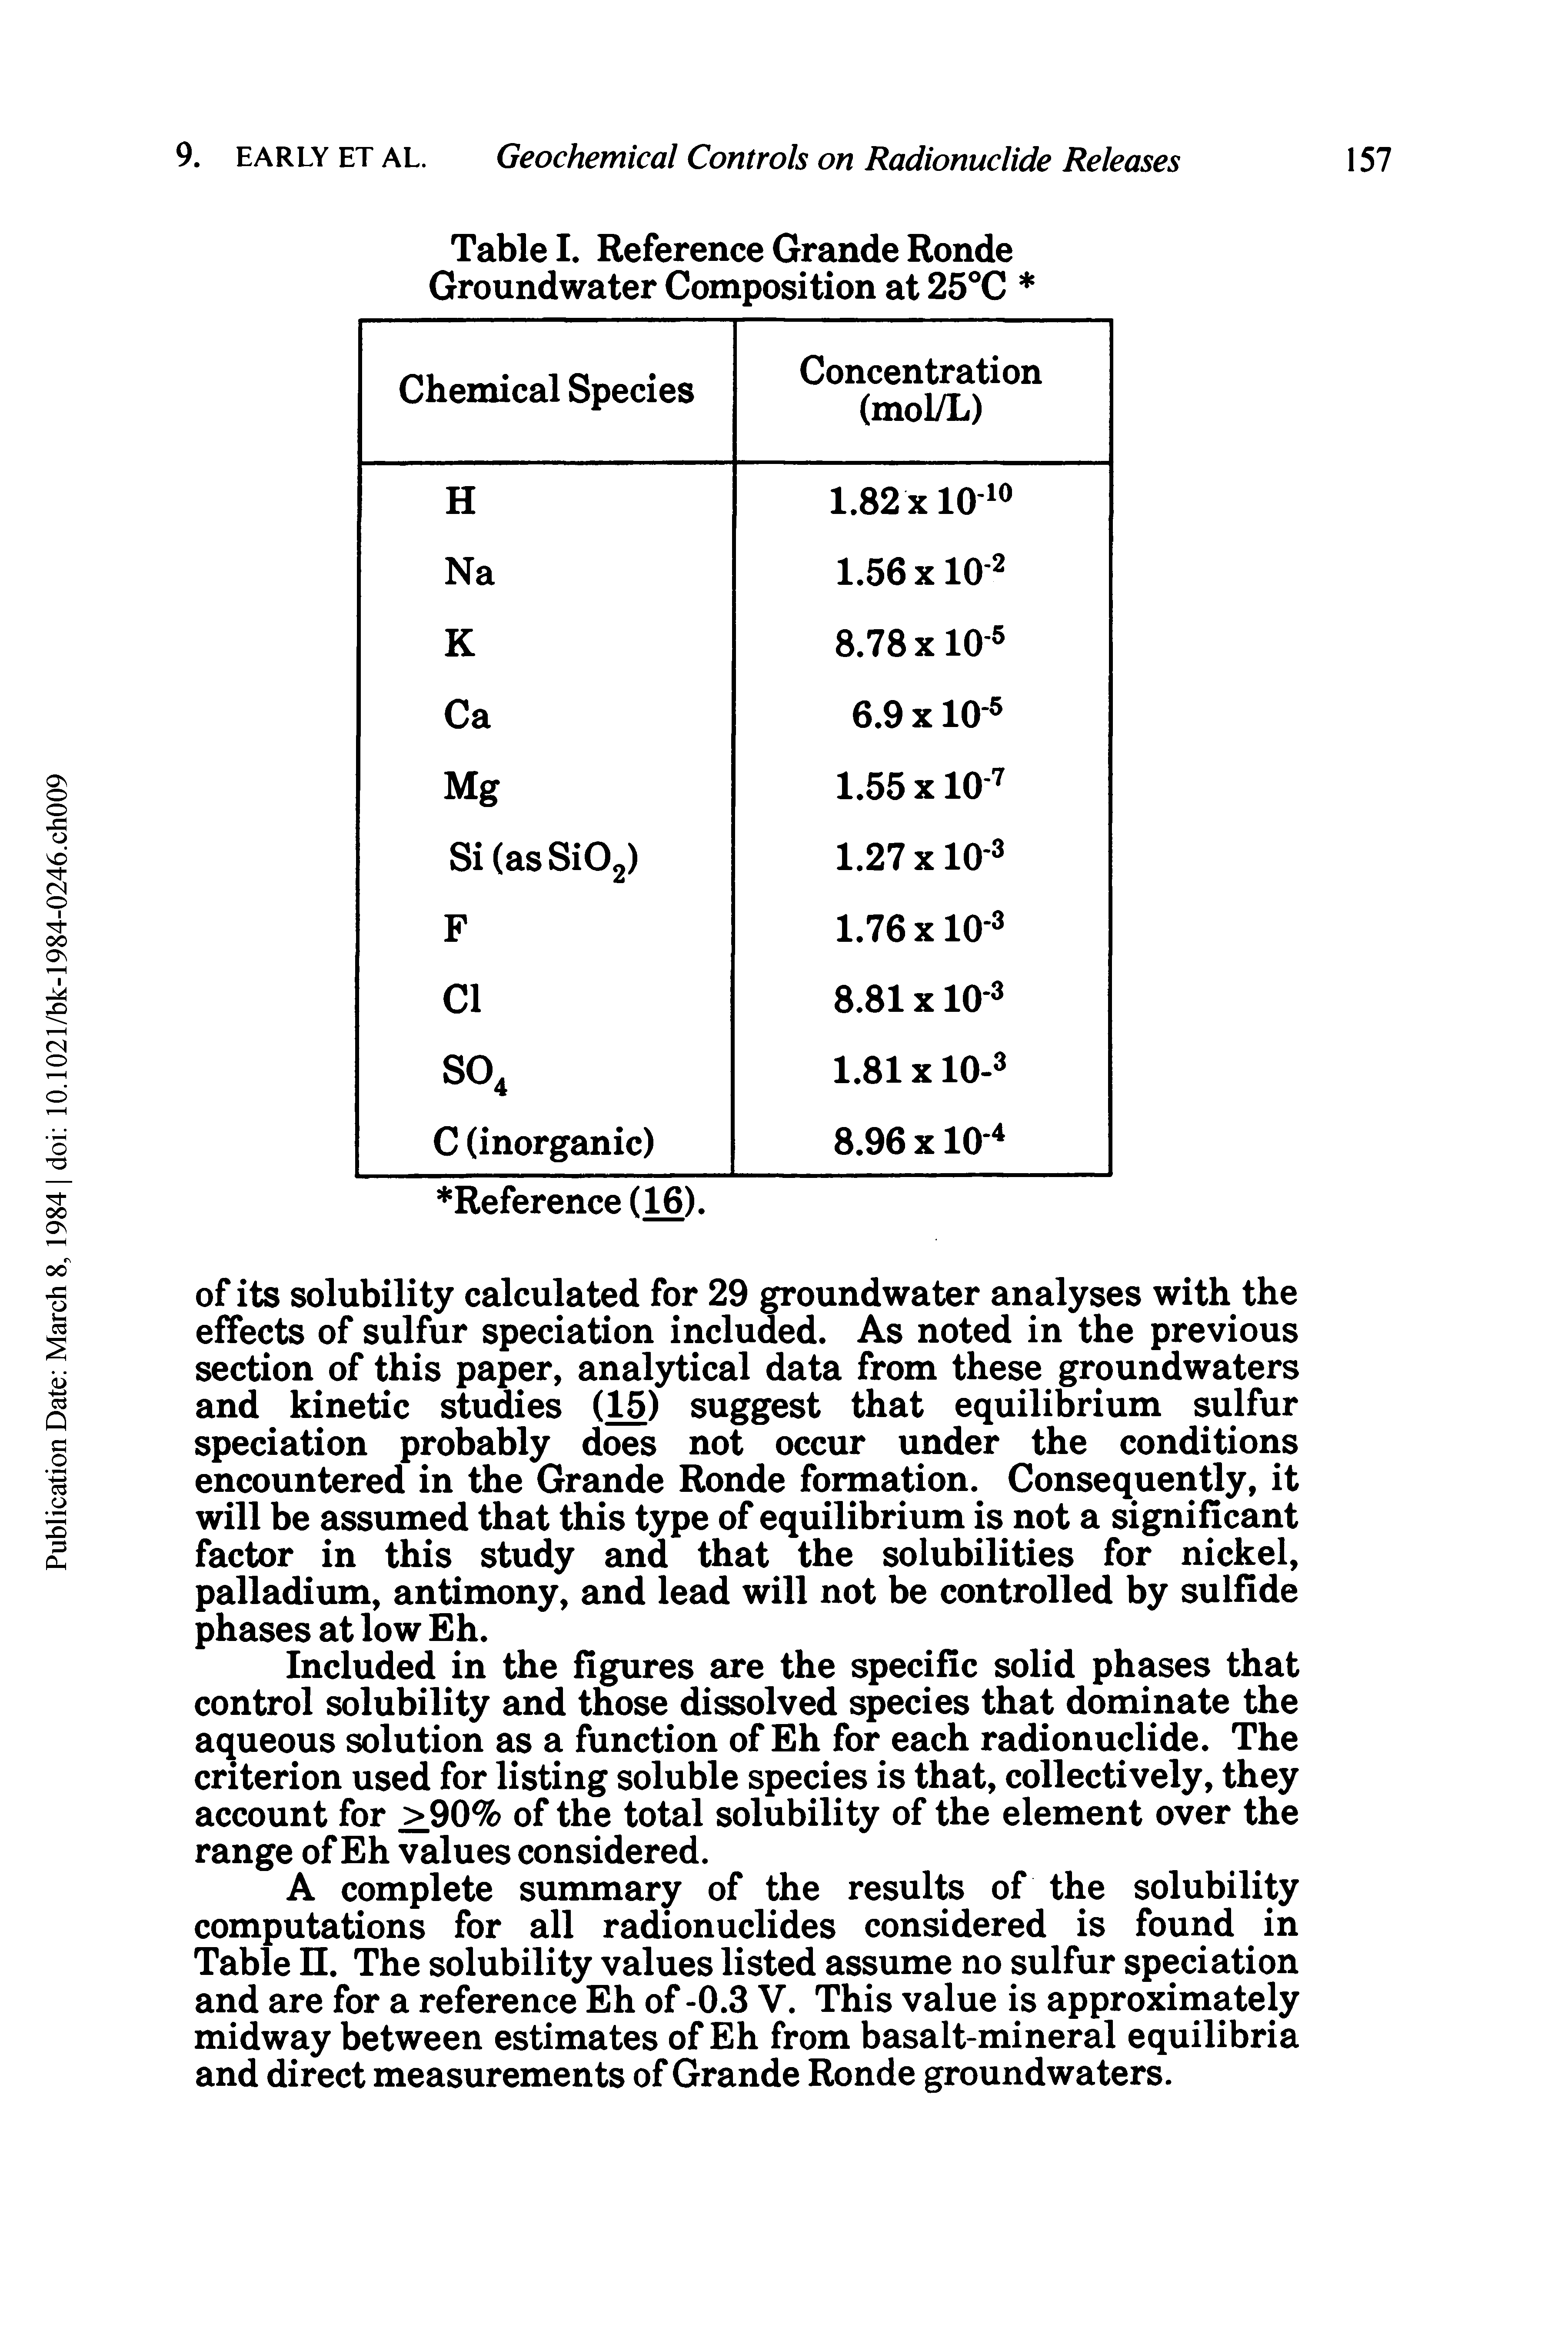 Table I. Reference Grande Ronde Groundwater Composition at 25°C ...